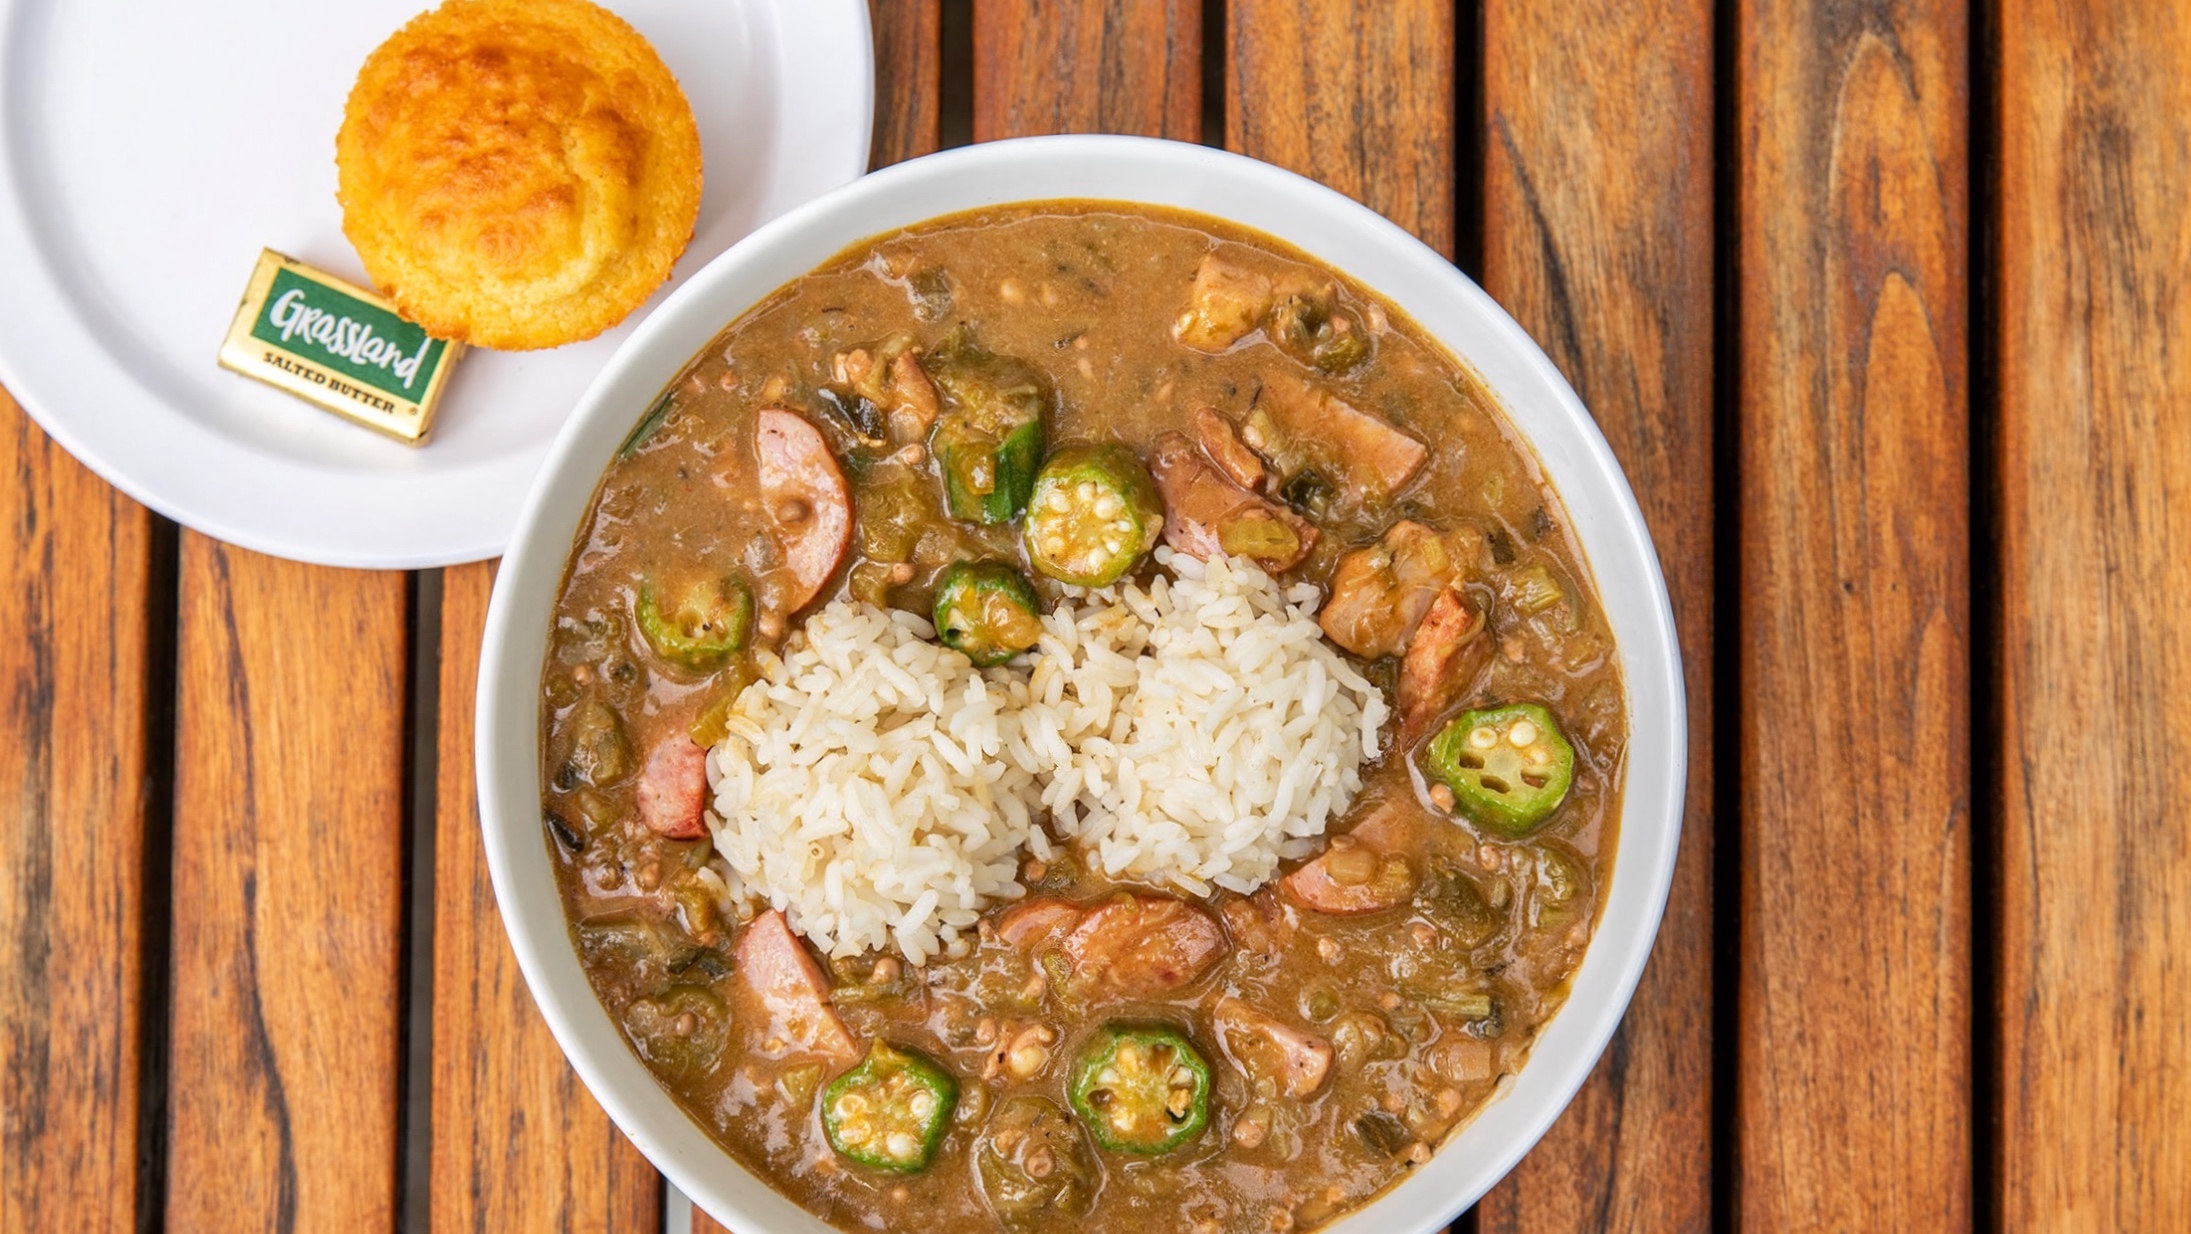 A bowl of gumbo with rice.